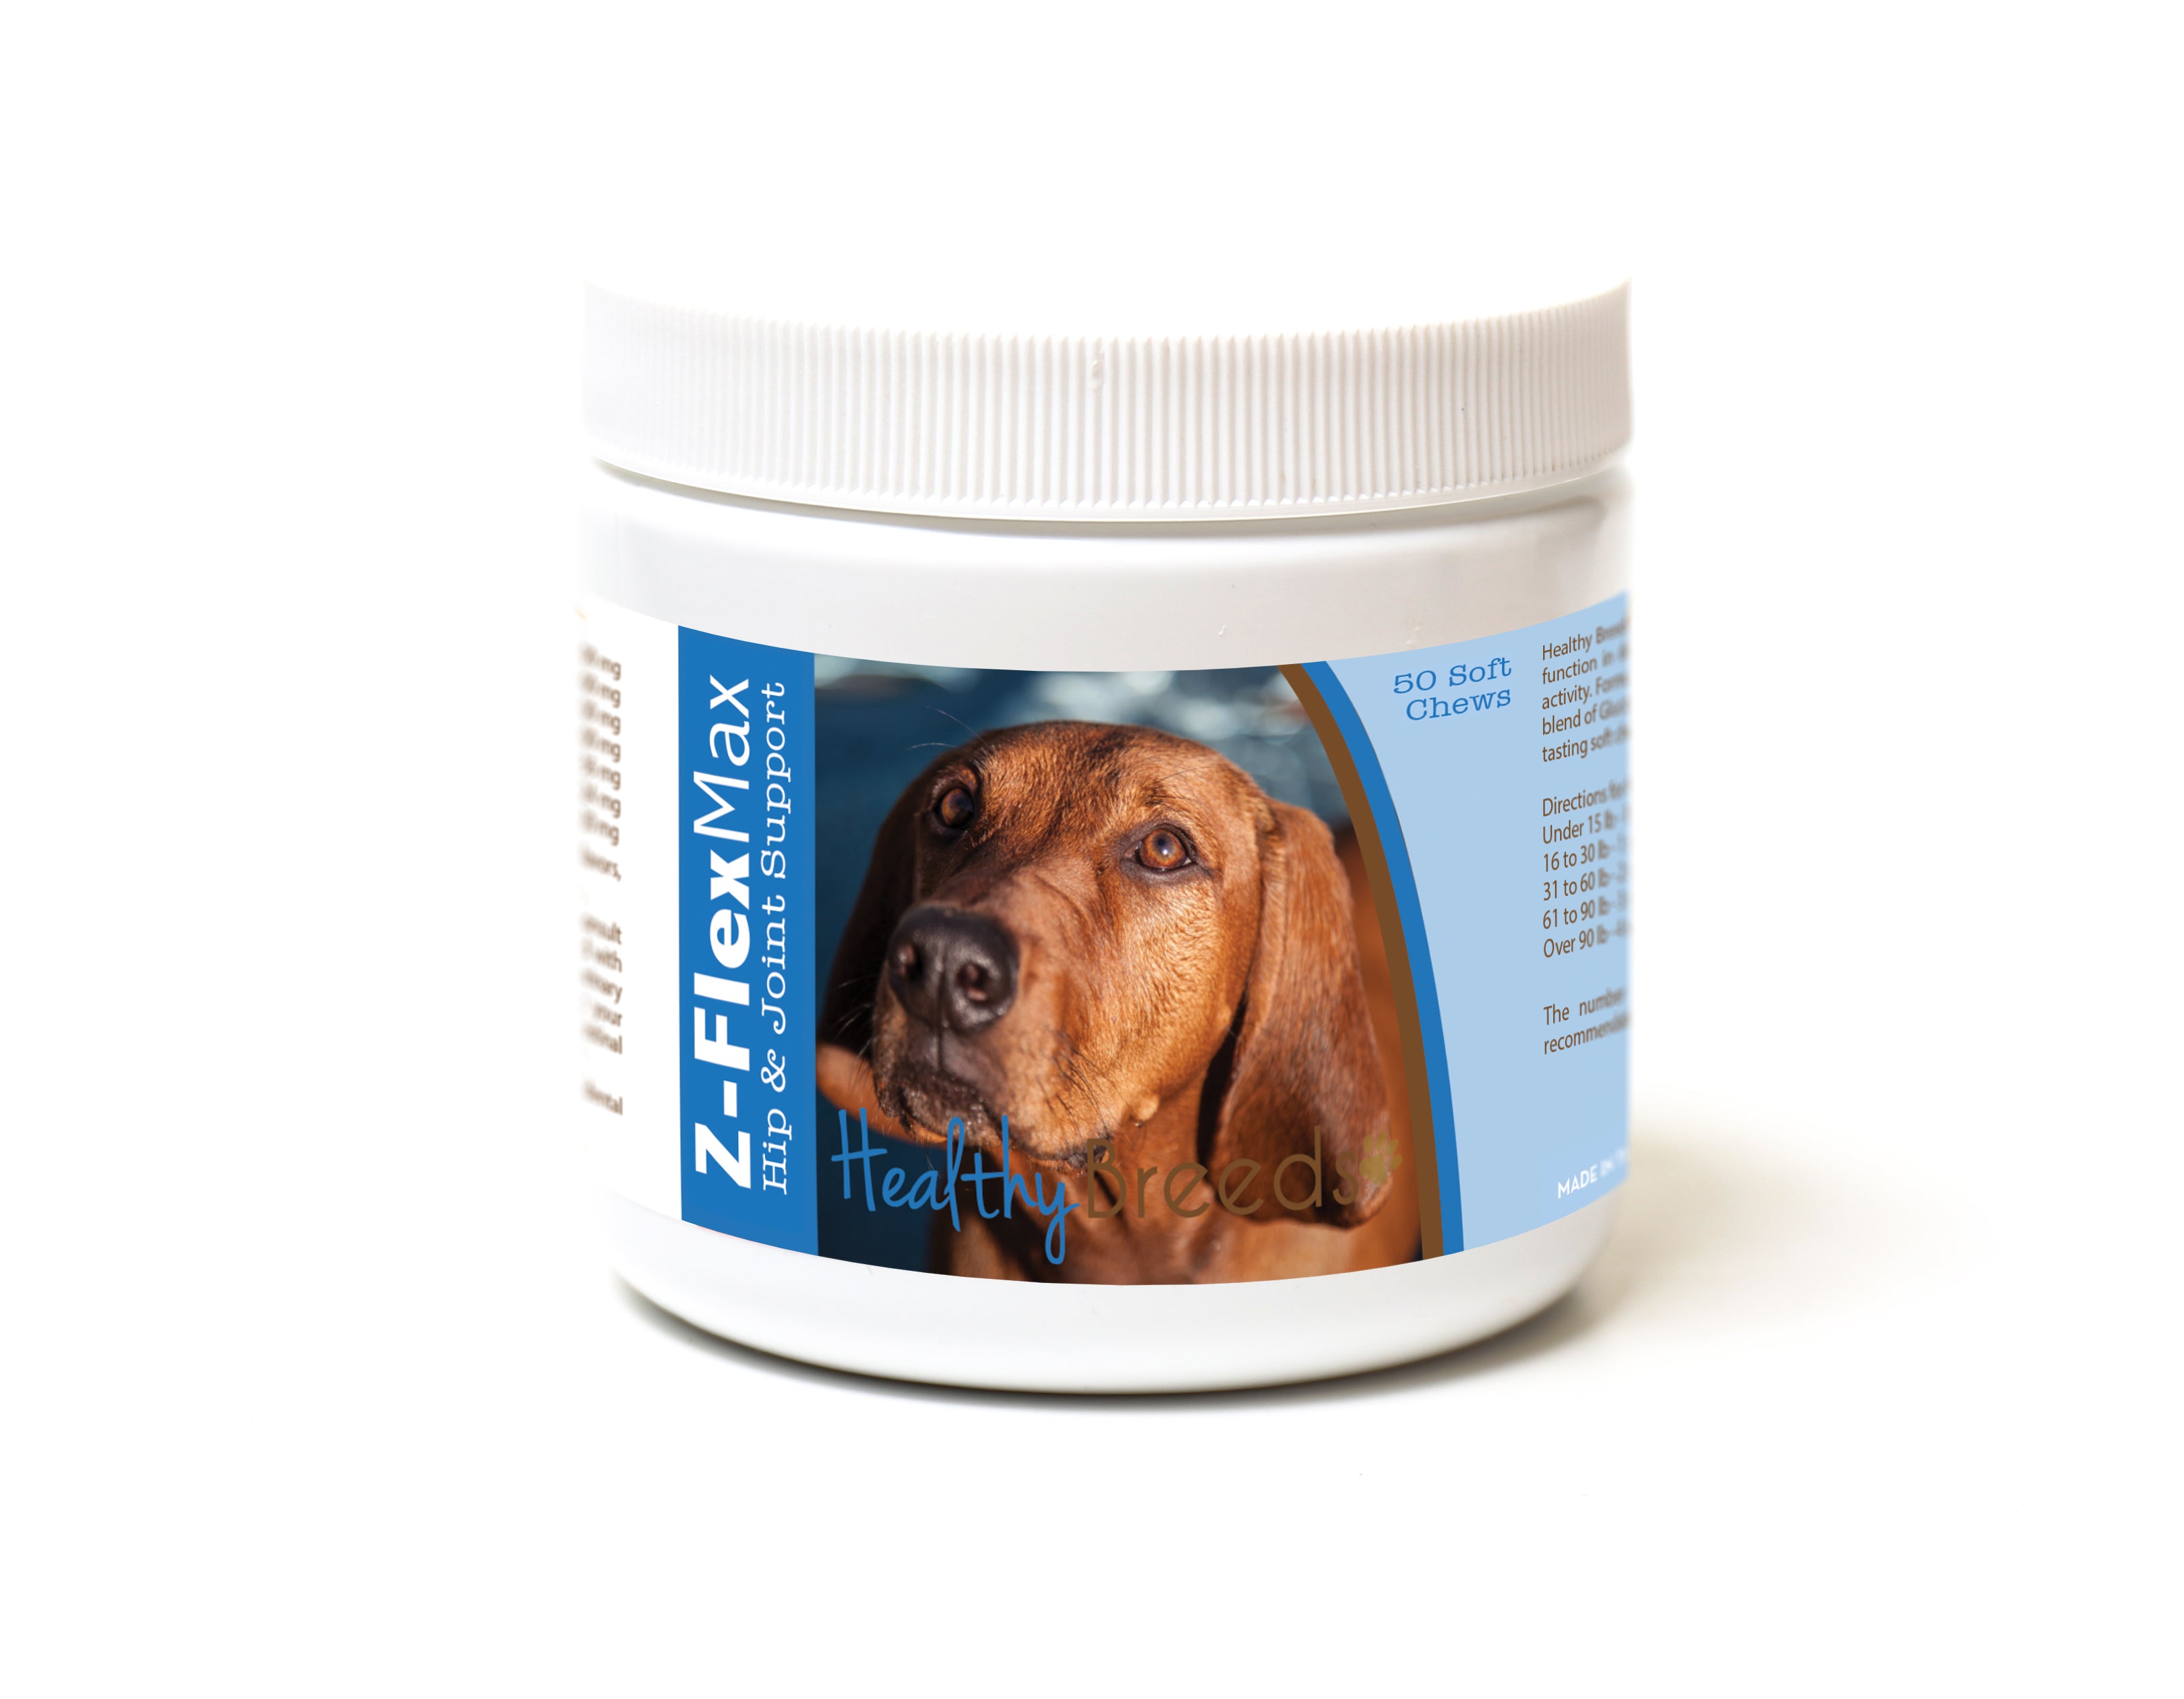 Redbone Coonhound Z-Flex Max Hip and Joint Soft Chews 50 Count